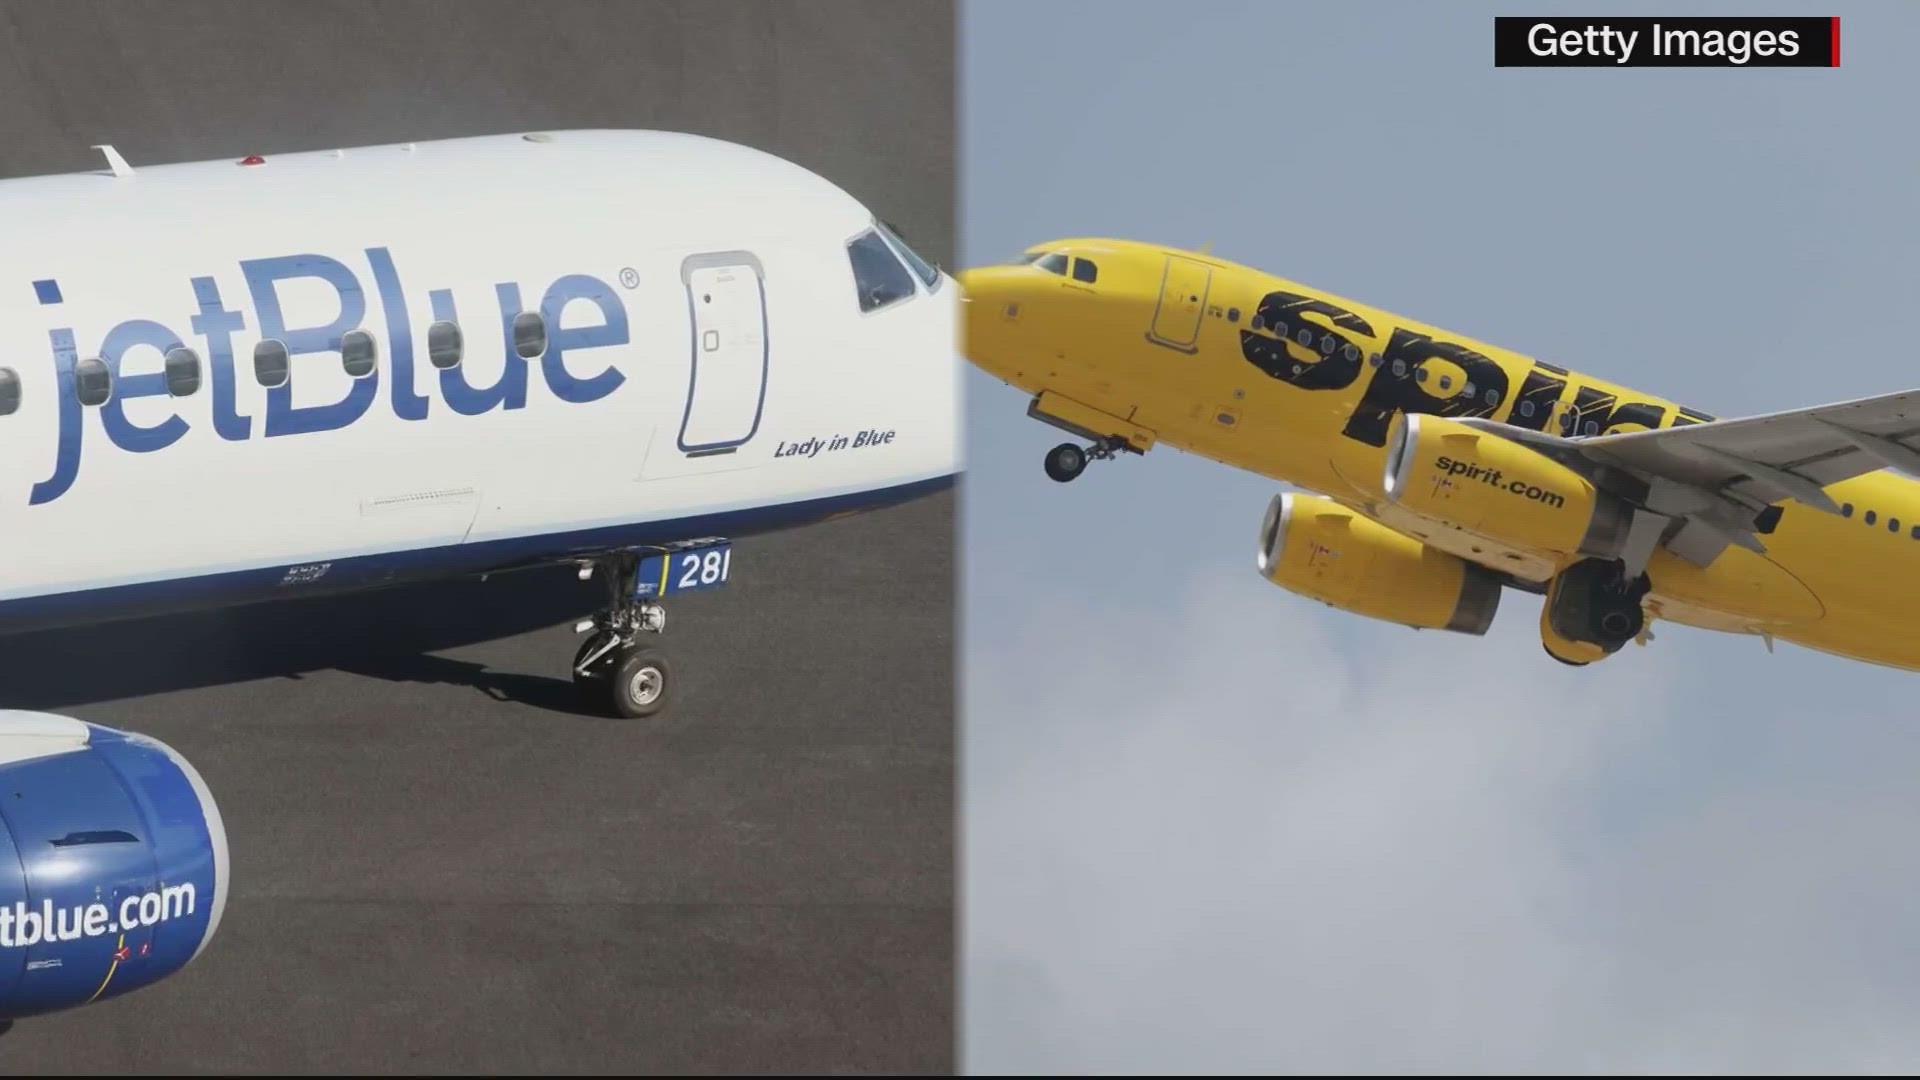 Jetblue's plan to takeover Spirit Airlines has hit some turbulence. The nearly 4-billion dollar deal was struck last summer.